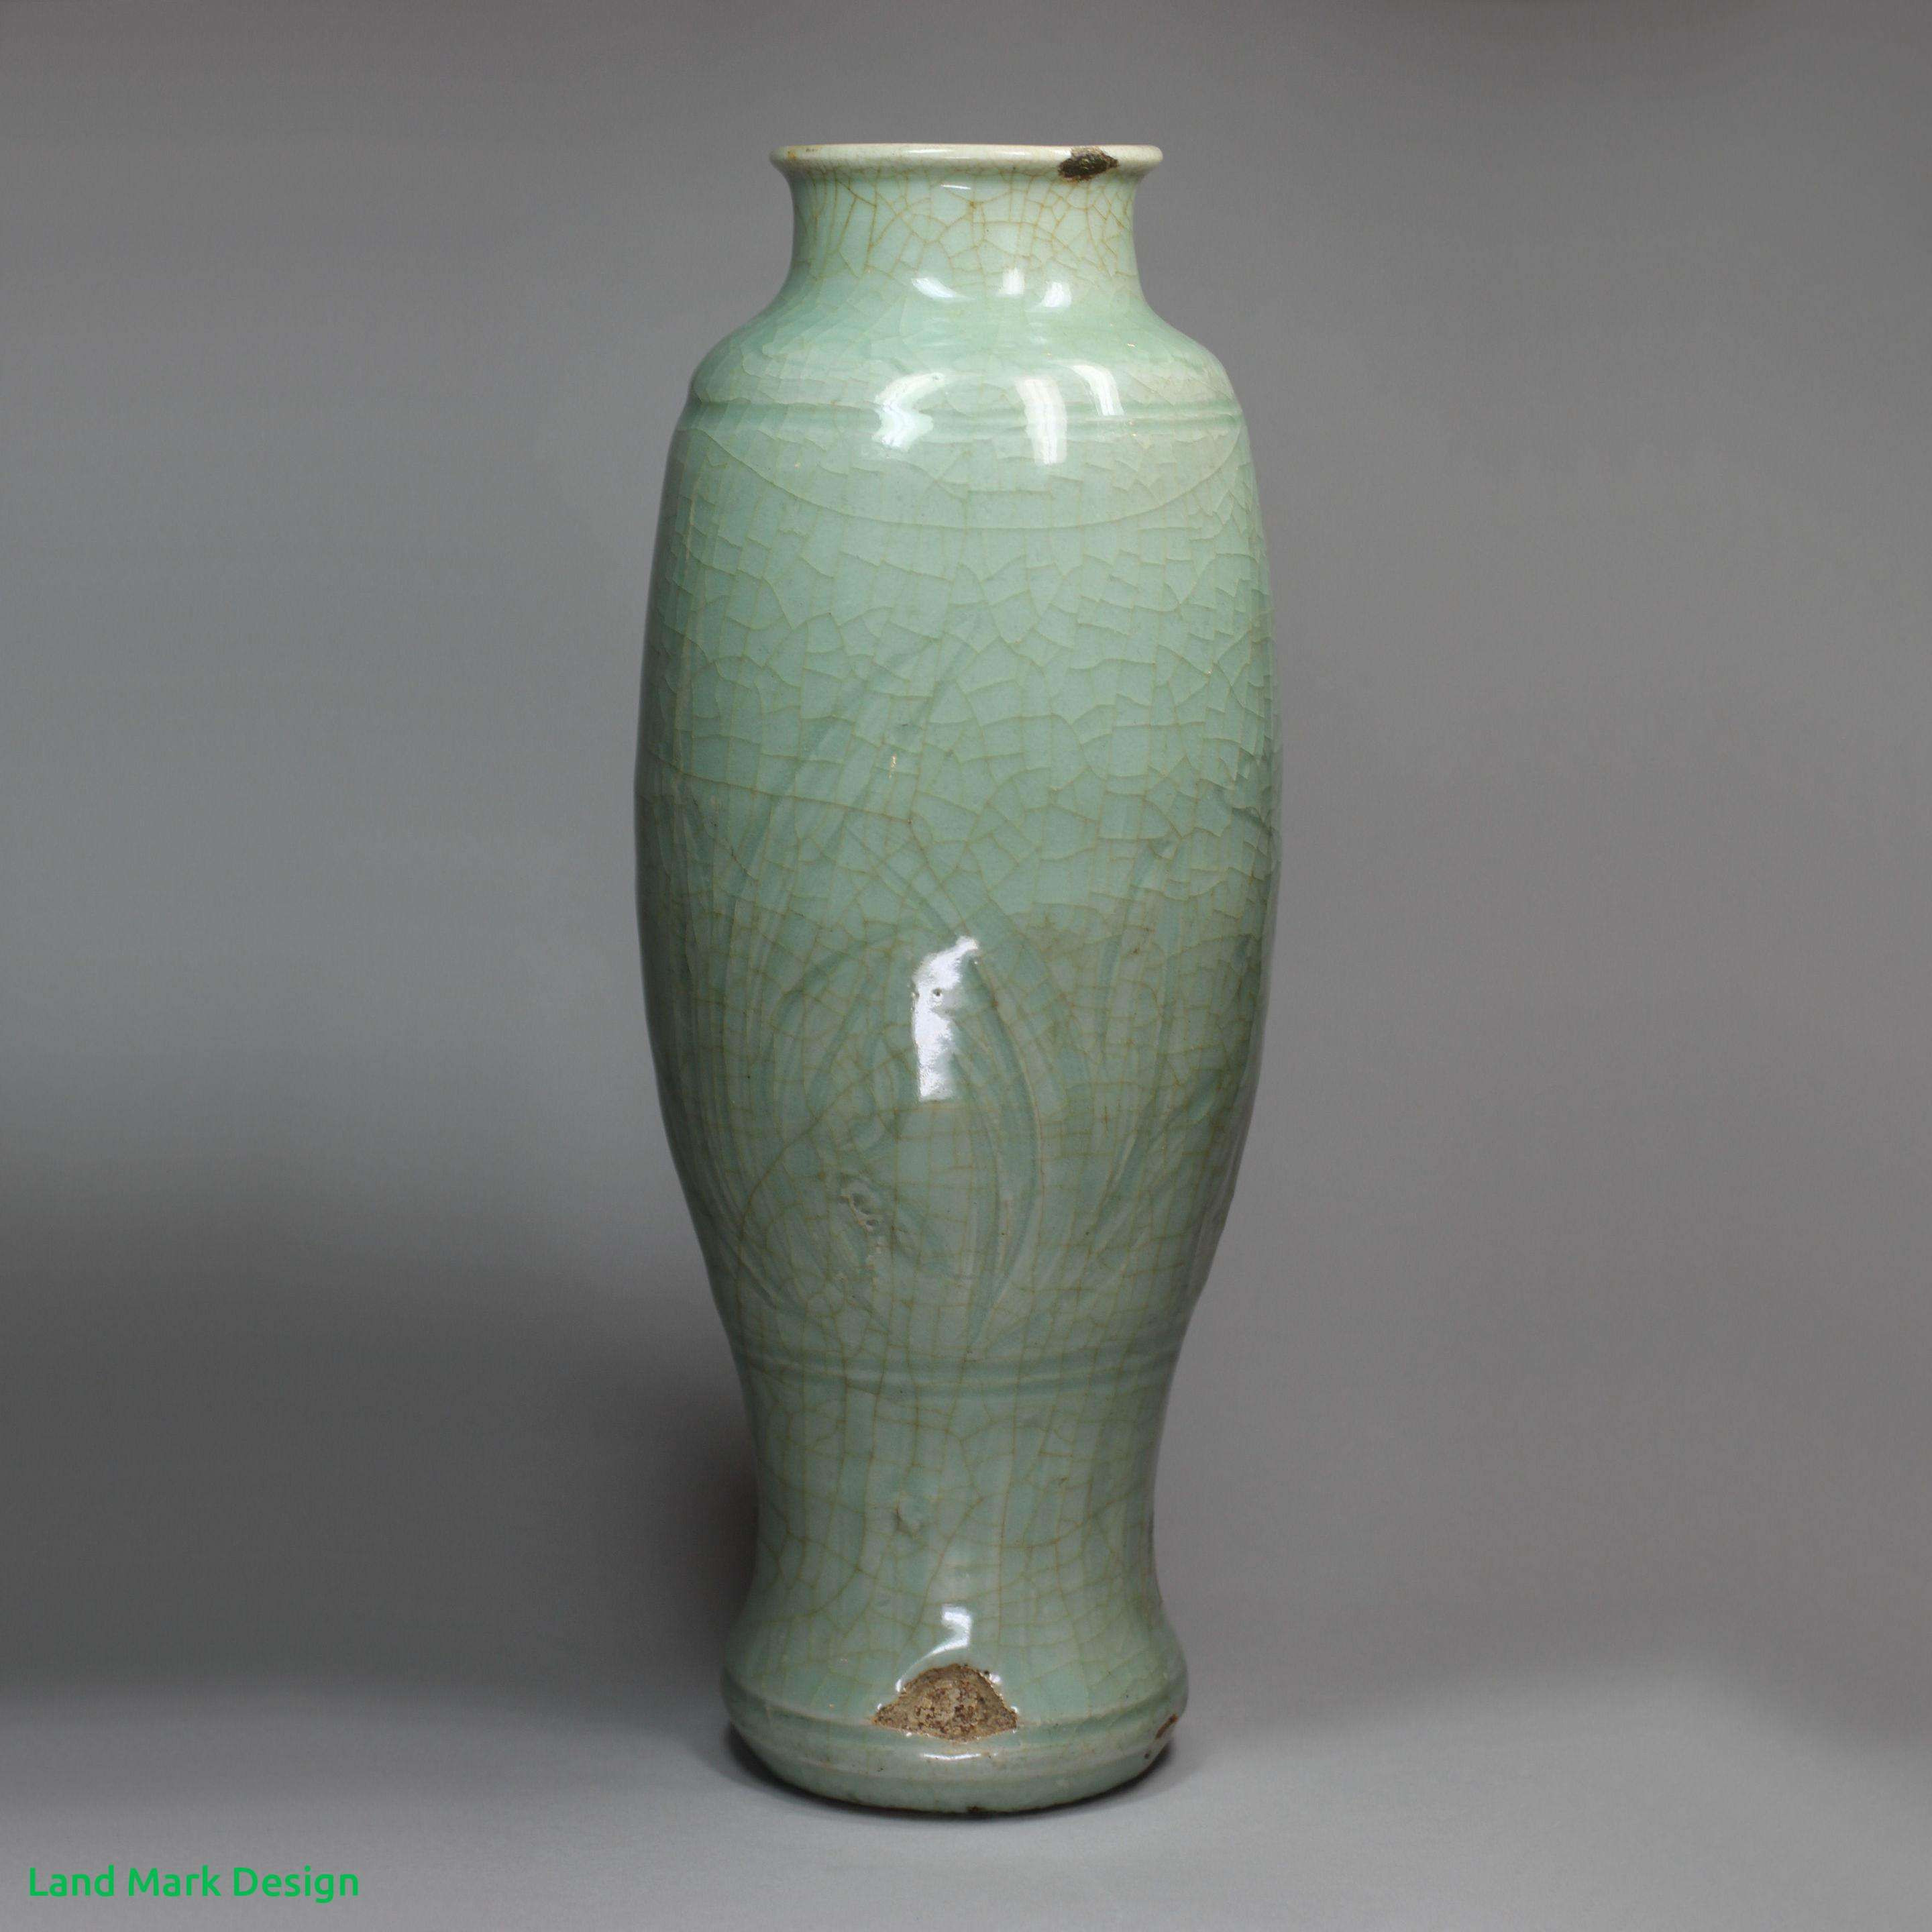 30 Stunning Japanese Vases for Sale 2024 free download japanese vases for sale of 22 large chinese vases for the floor the weekly world with regard to cheap floor vase